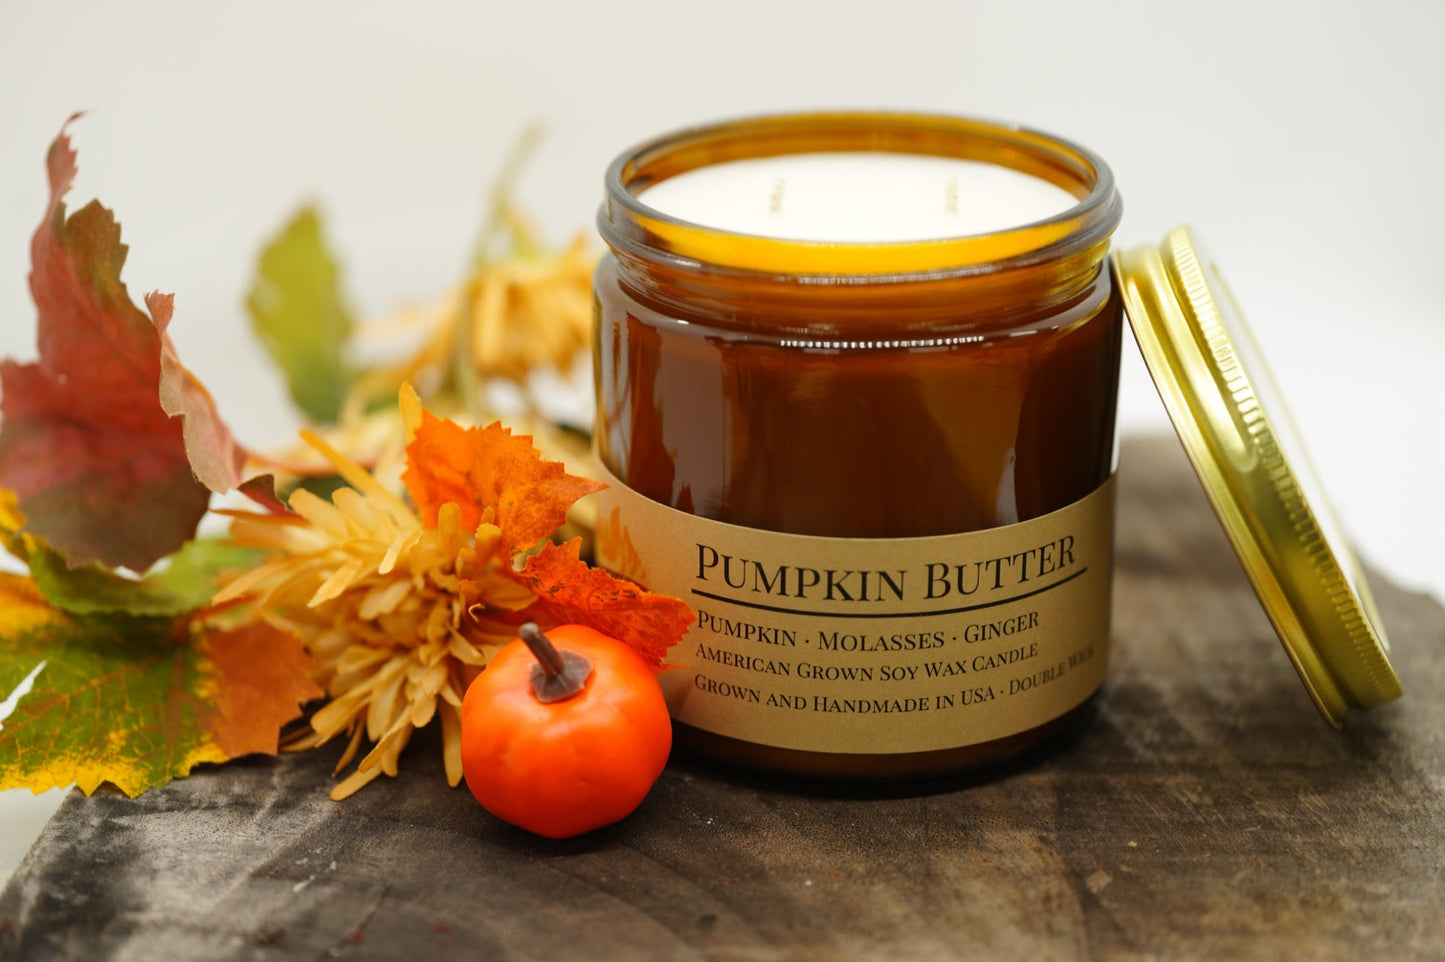 Pumpkin Butter Soy Candle | 16 oz Double Wick Amber Apothecary Jar